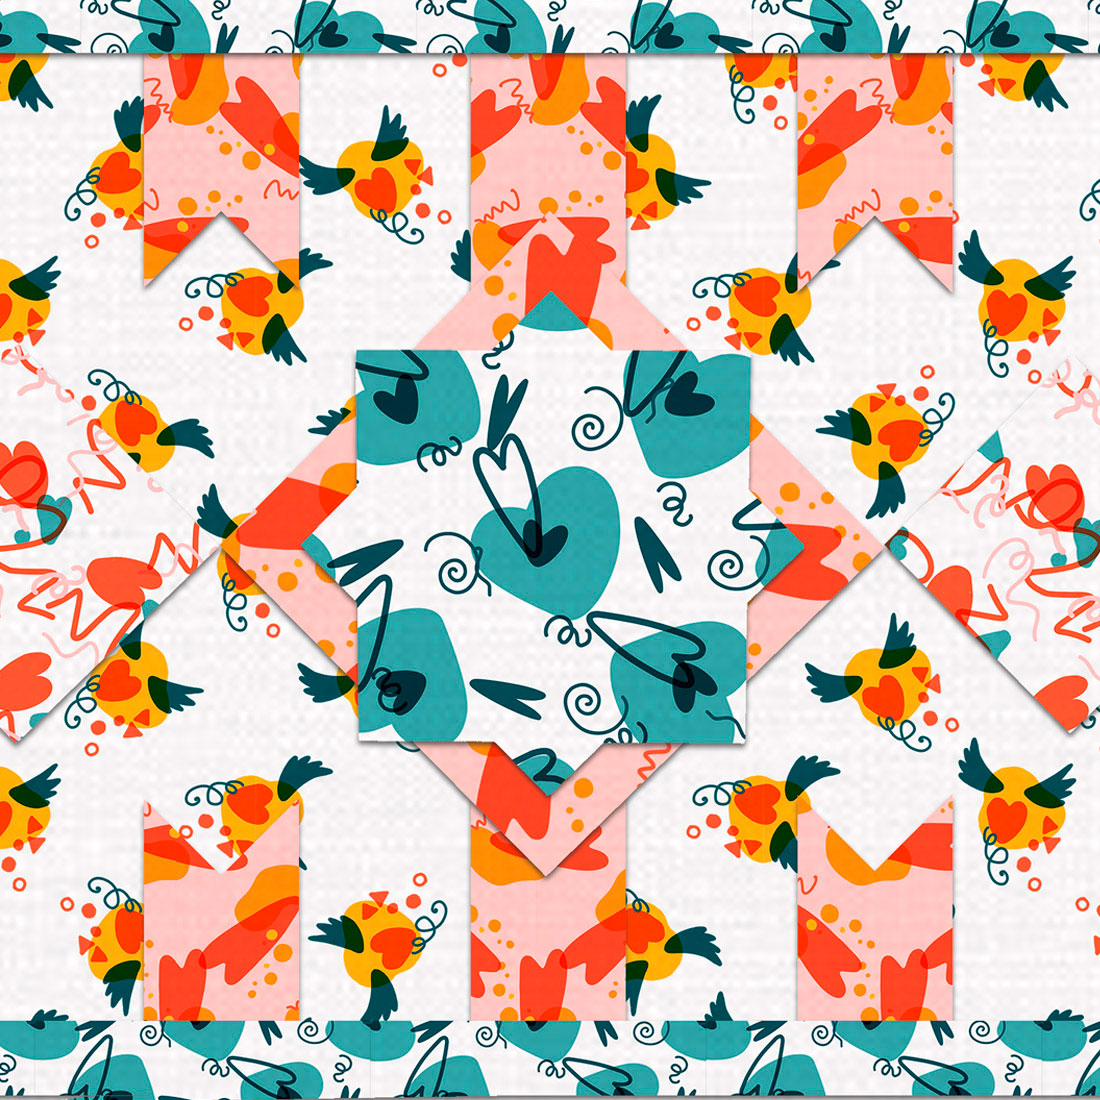 A selection of colorful images of patterns with a heart.